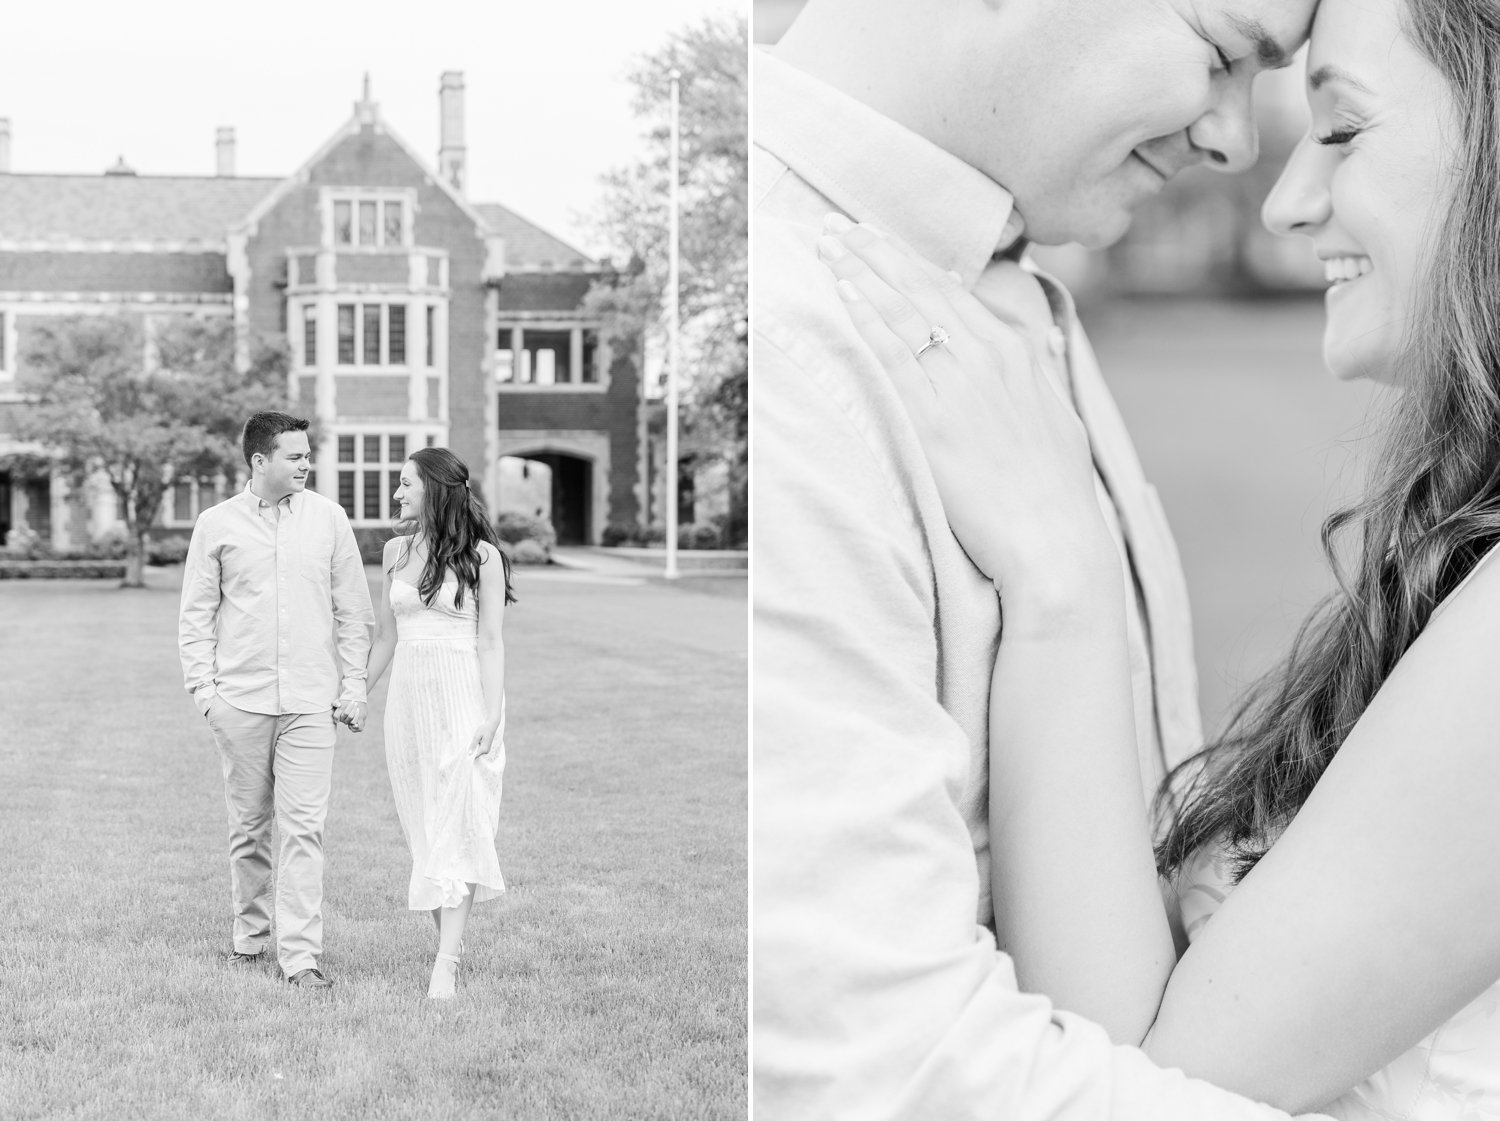 spring-engagement-session-waveny-park-new-canaan-connecticut-wedding-photographer-shaina-lee-photography